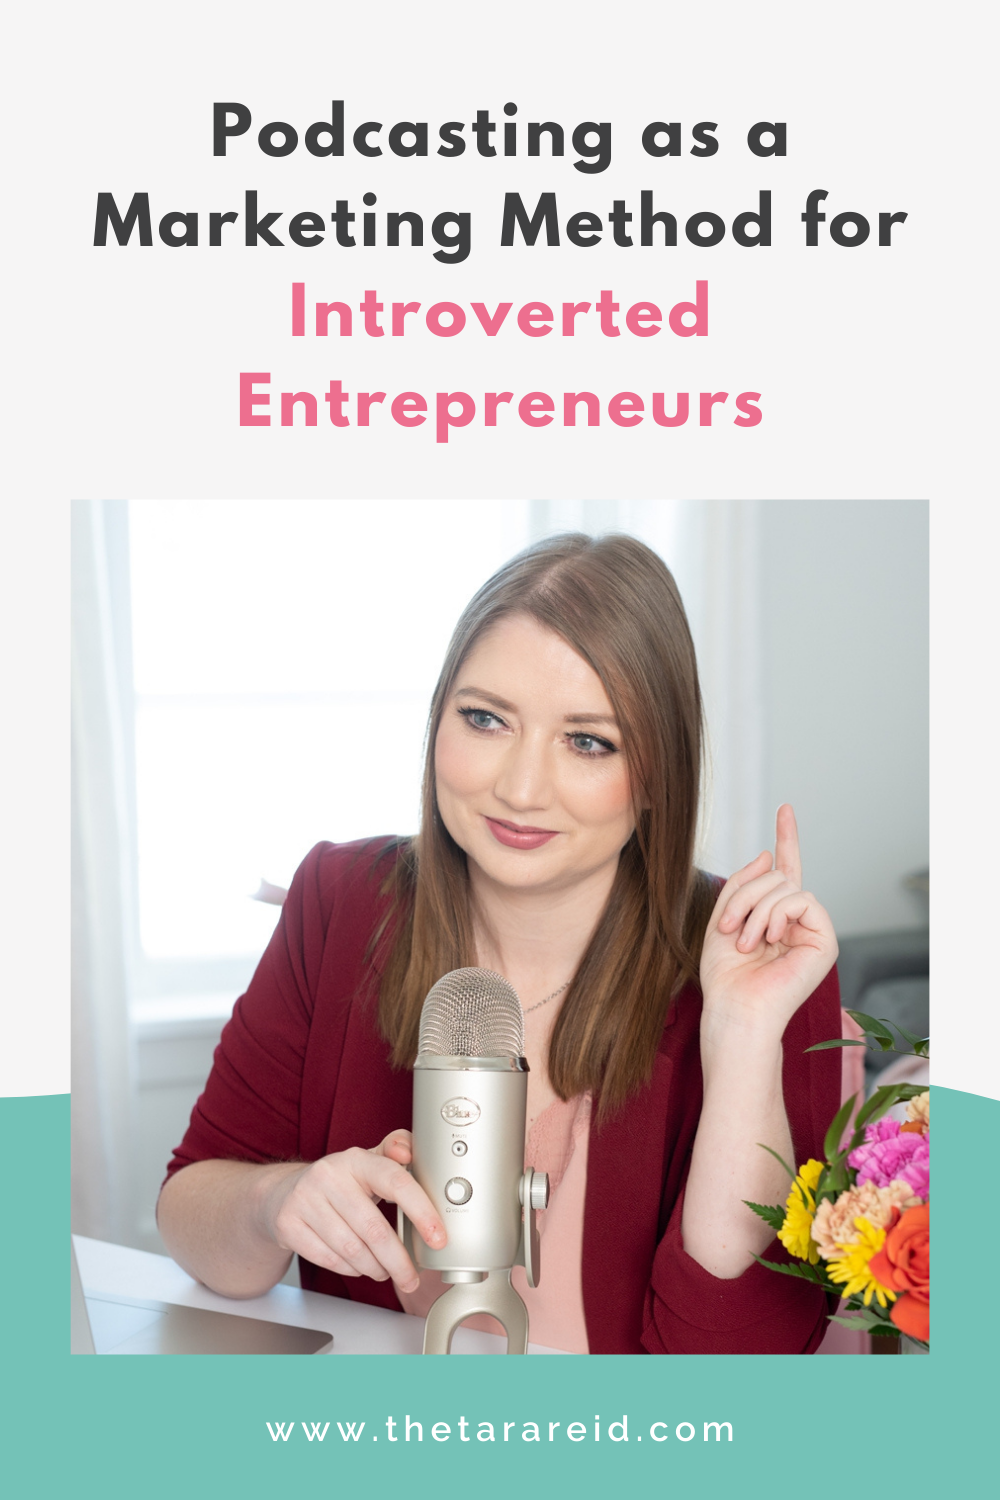 Podcasting as a Marketing Method for Introverted Entrepreneurs